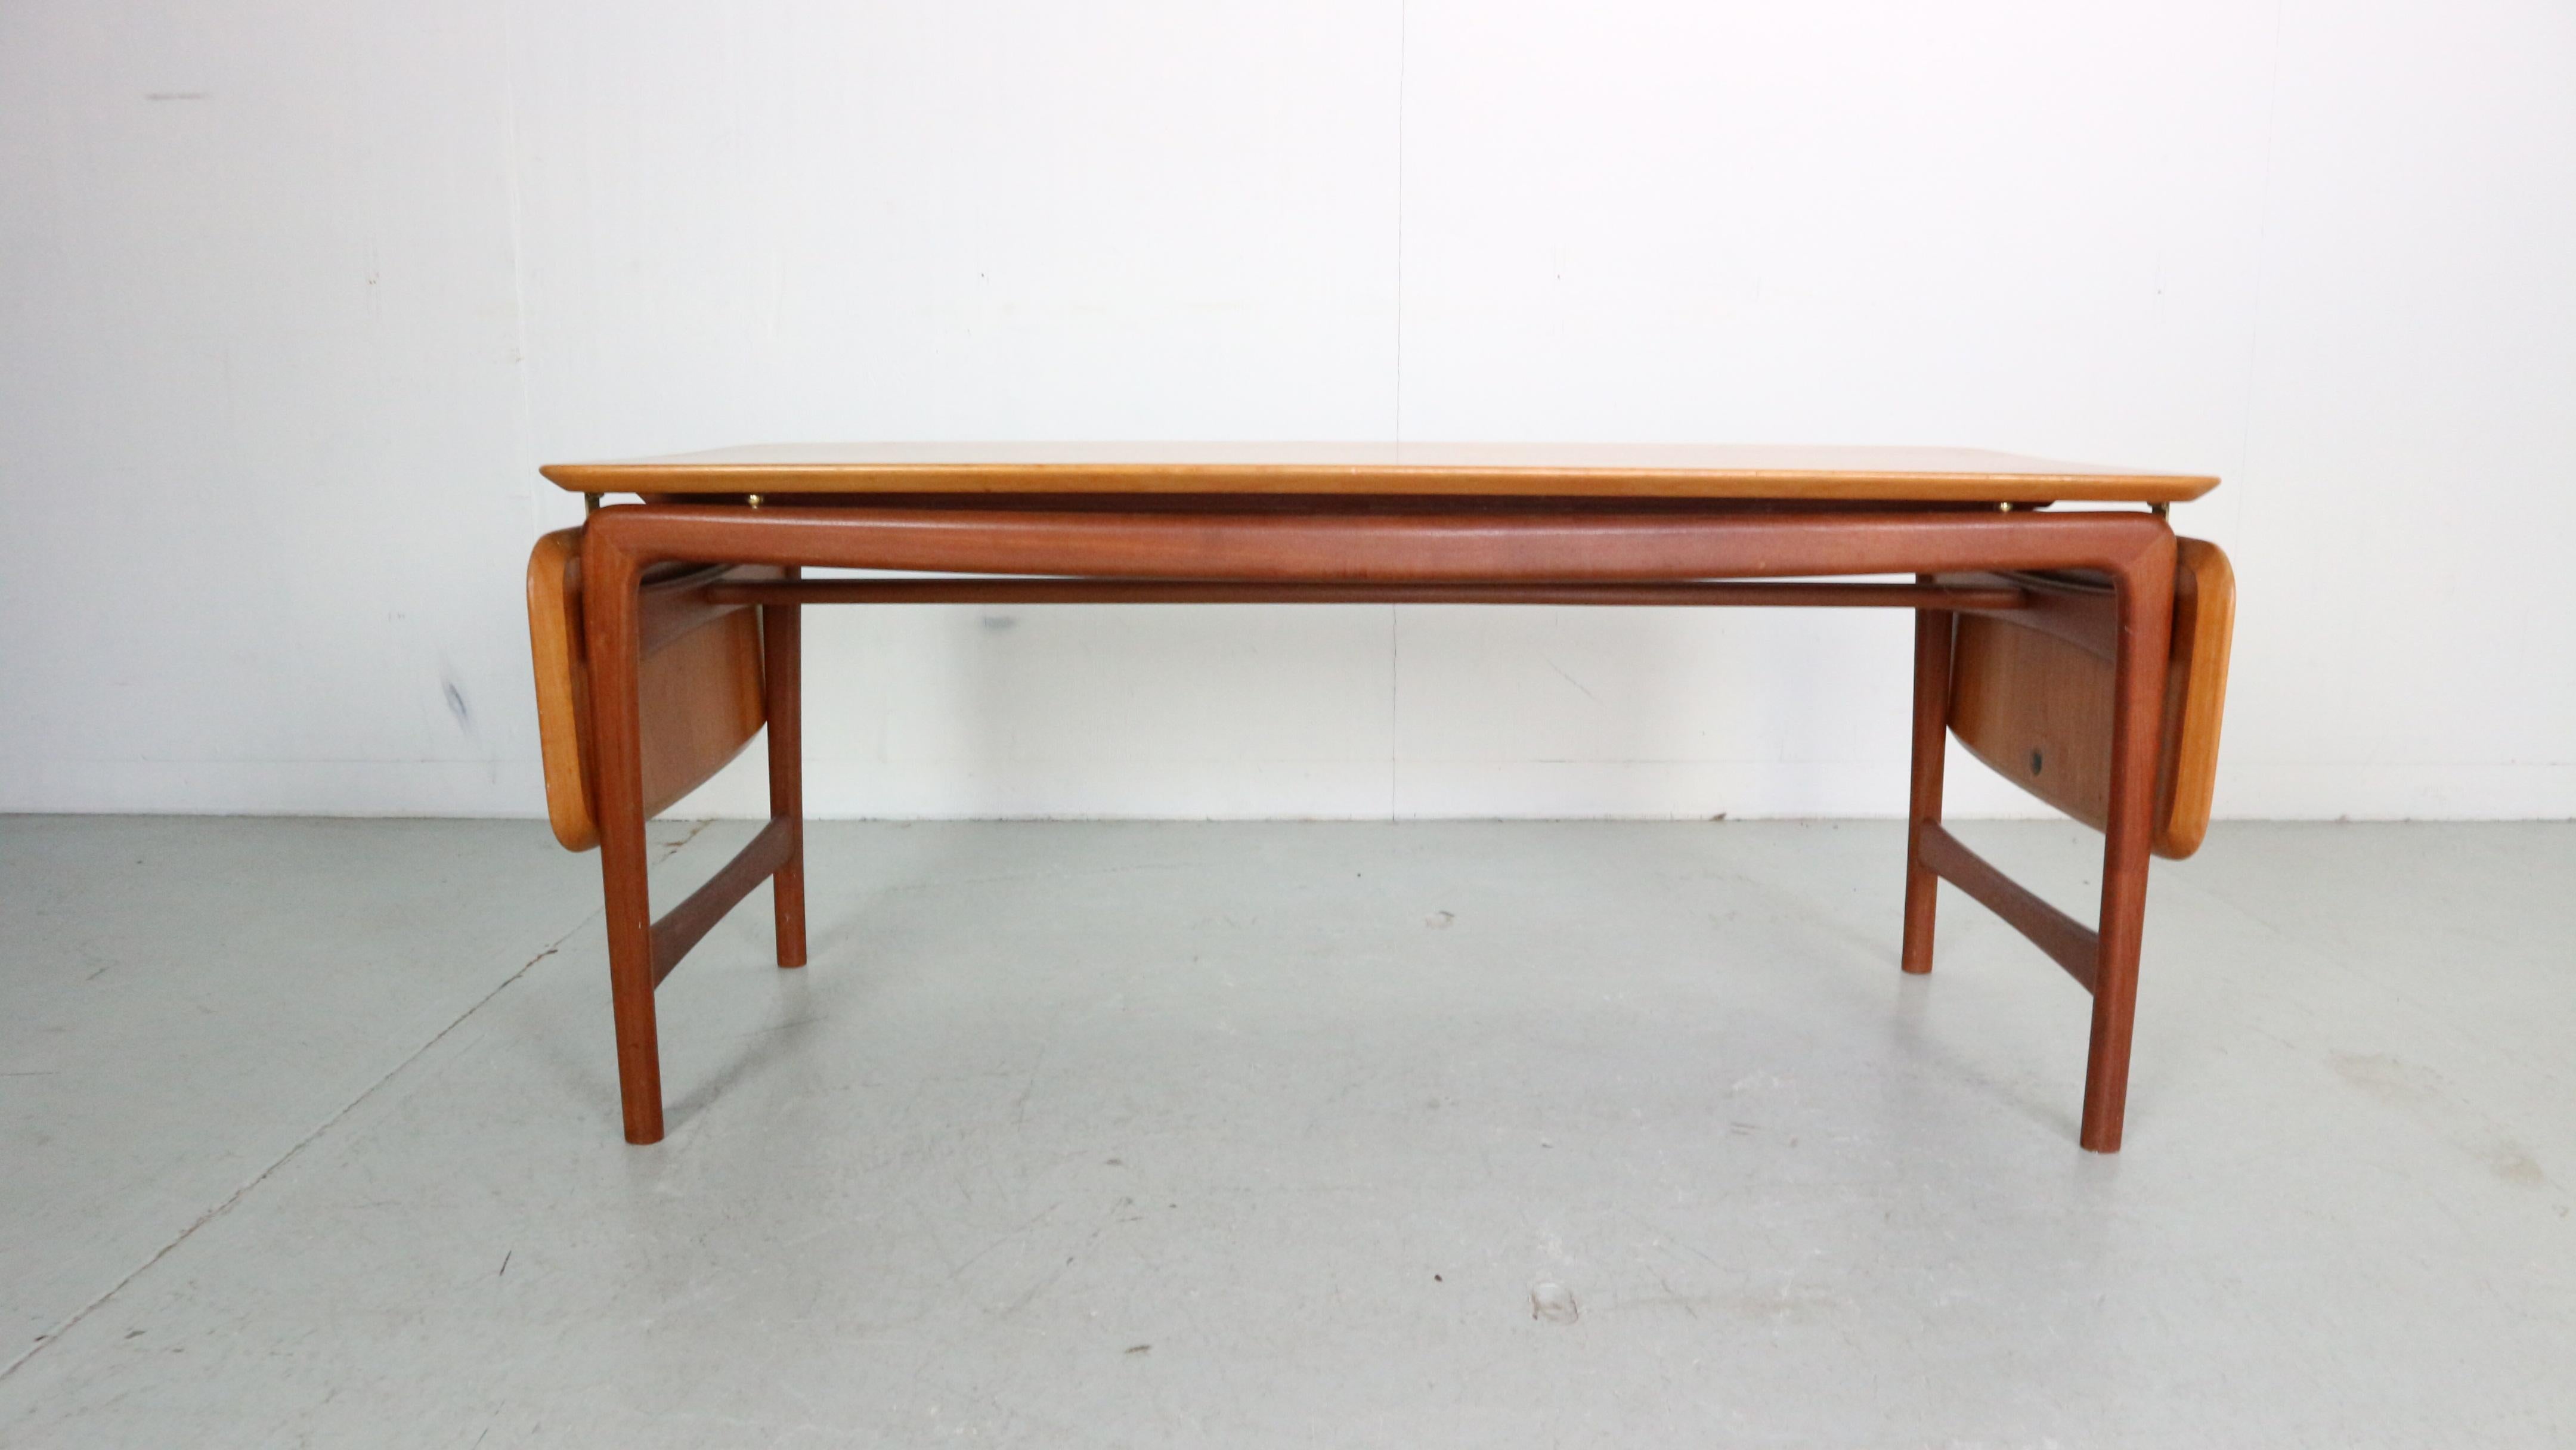 Vintage solid teak table designed by the famous Danish designer duo Peter Hvidt & Orla Mølgaard-Nielsen for France & Daverkosen. This high-end design table features a typical mid-century Danish design, gorgeous solid teak wood, messing fittings and